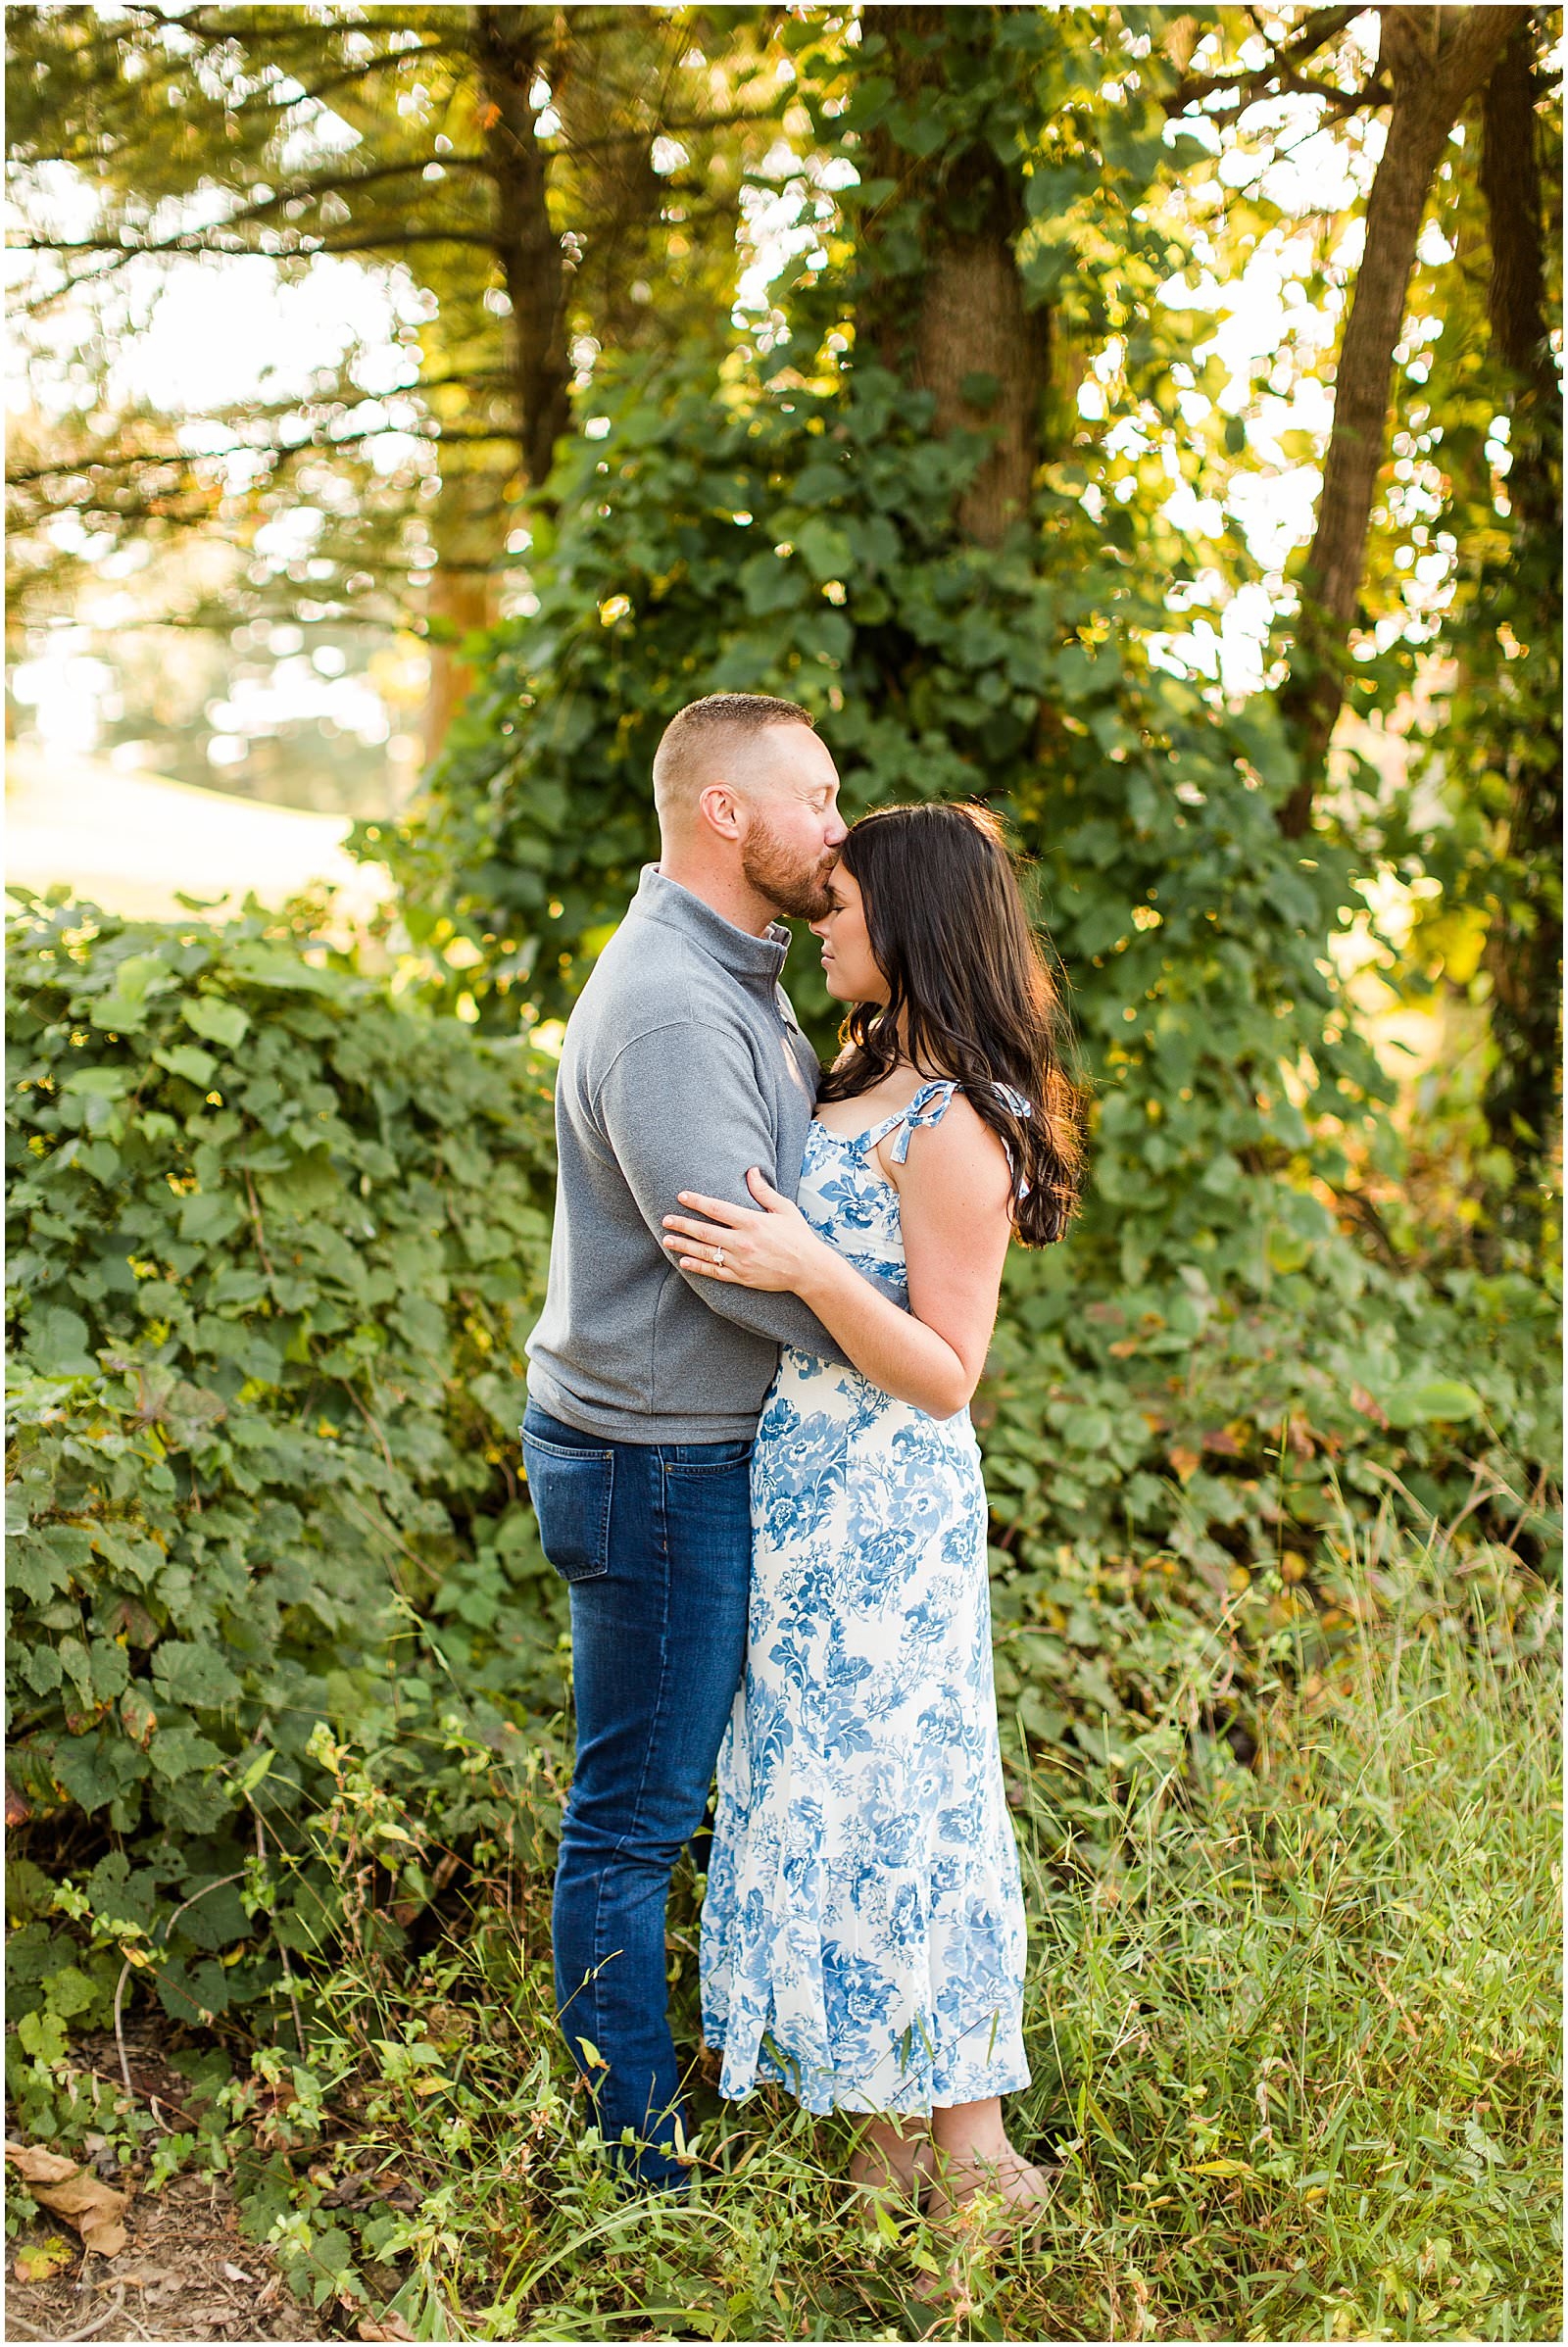 A Rolling Hills Country Club Engagement Session | Meagan and Kyle | Bret and Brandie Photography 0021.jpg